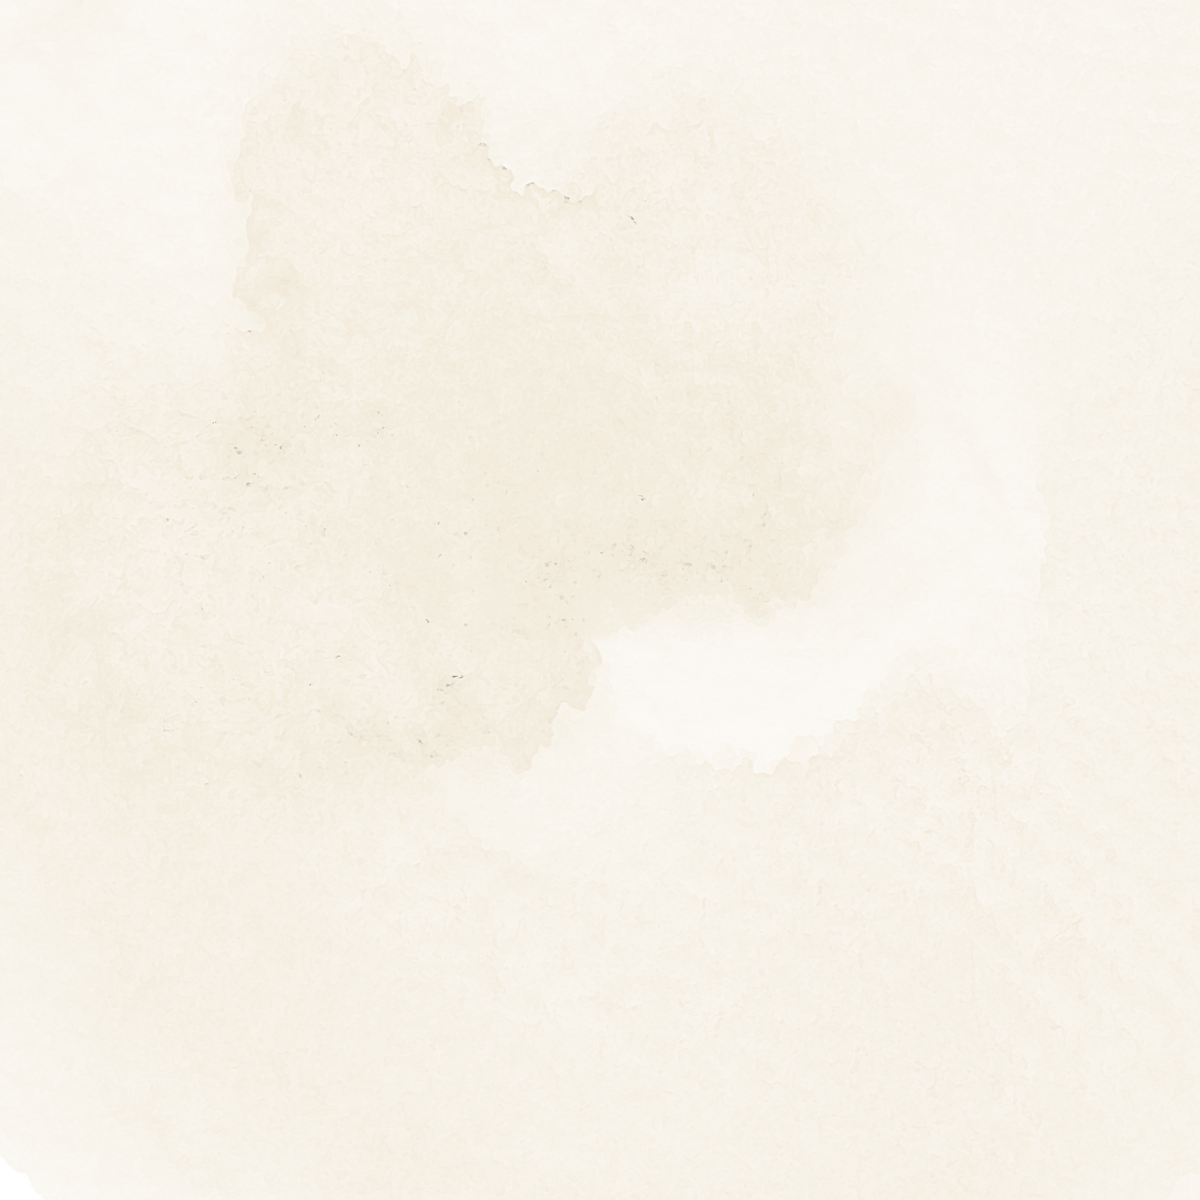 Neutral Watercolor Background